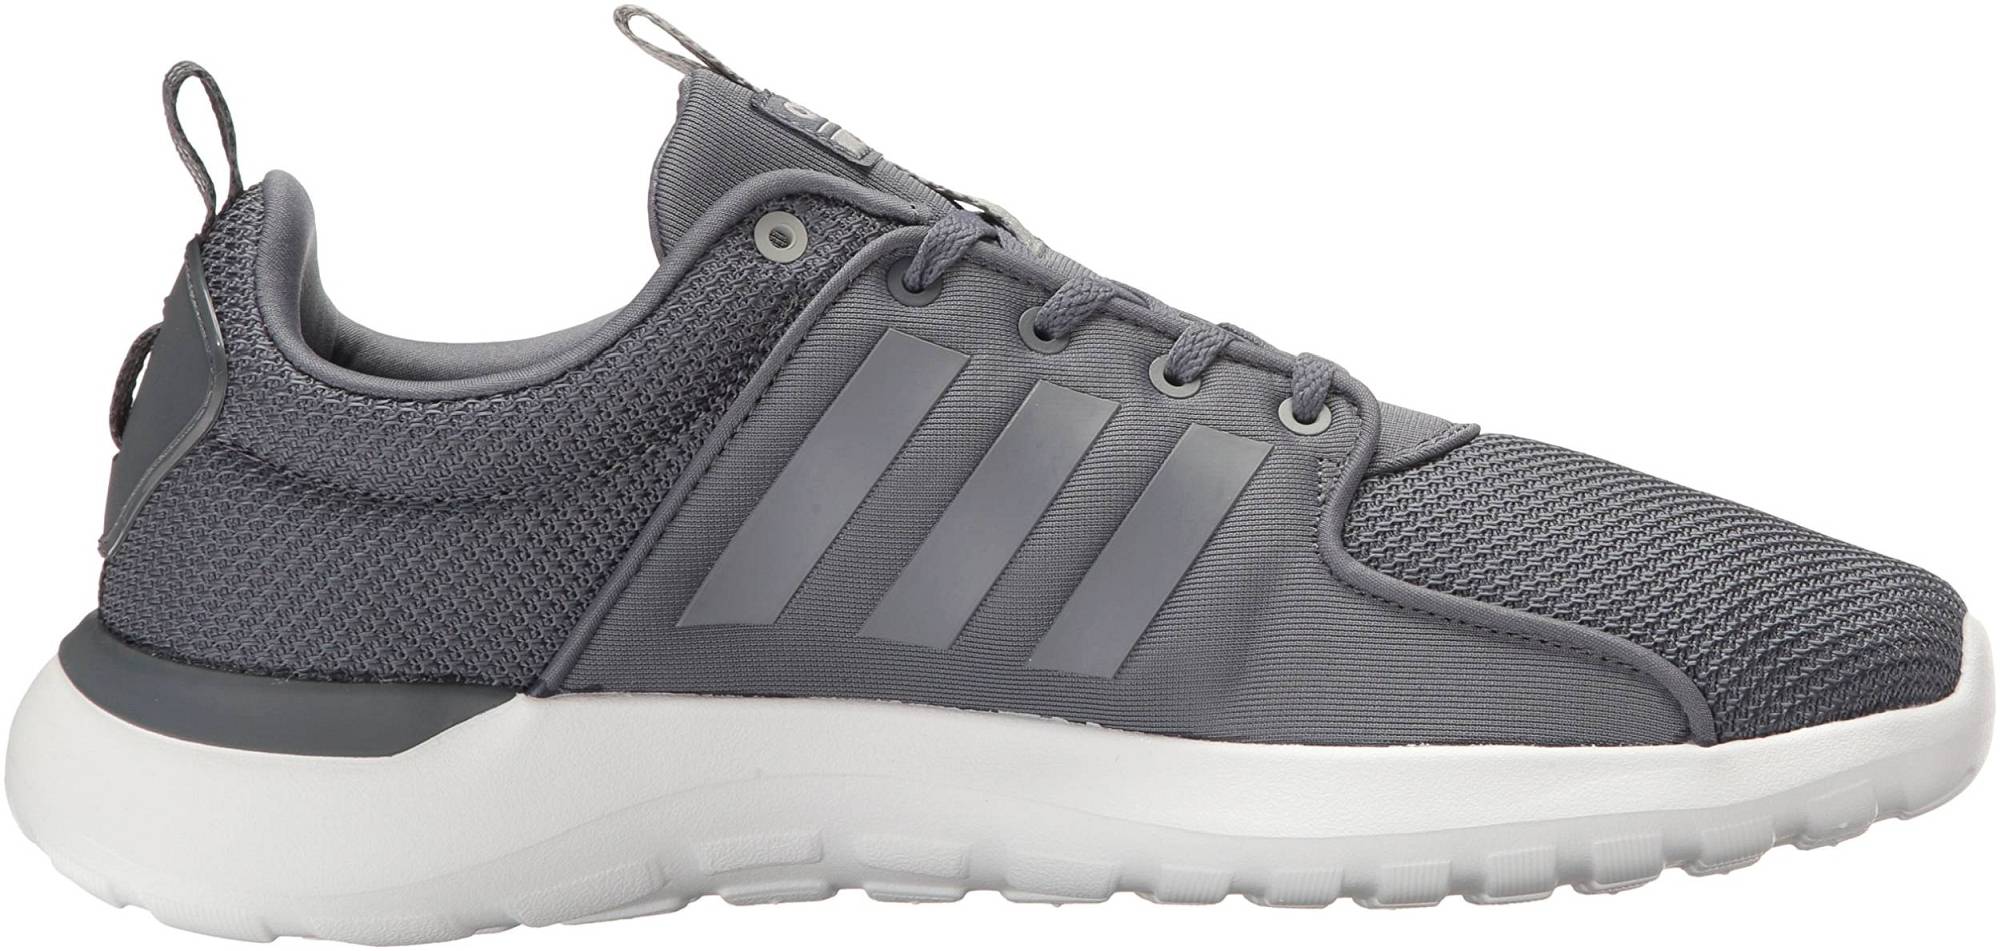 Adidas Cloudfoam Lite Racer – Shoes Reviews & Reasons To Buy